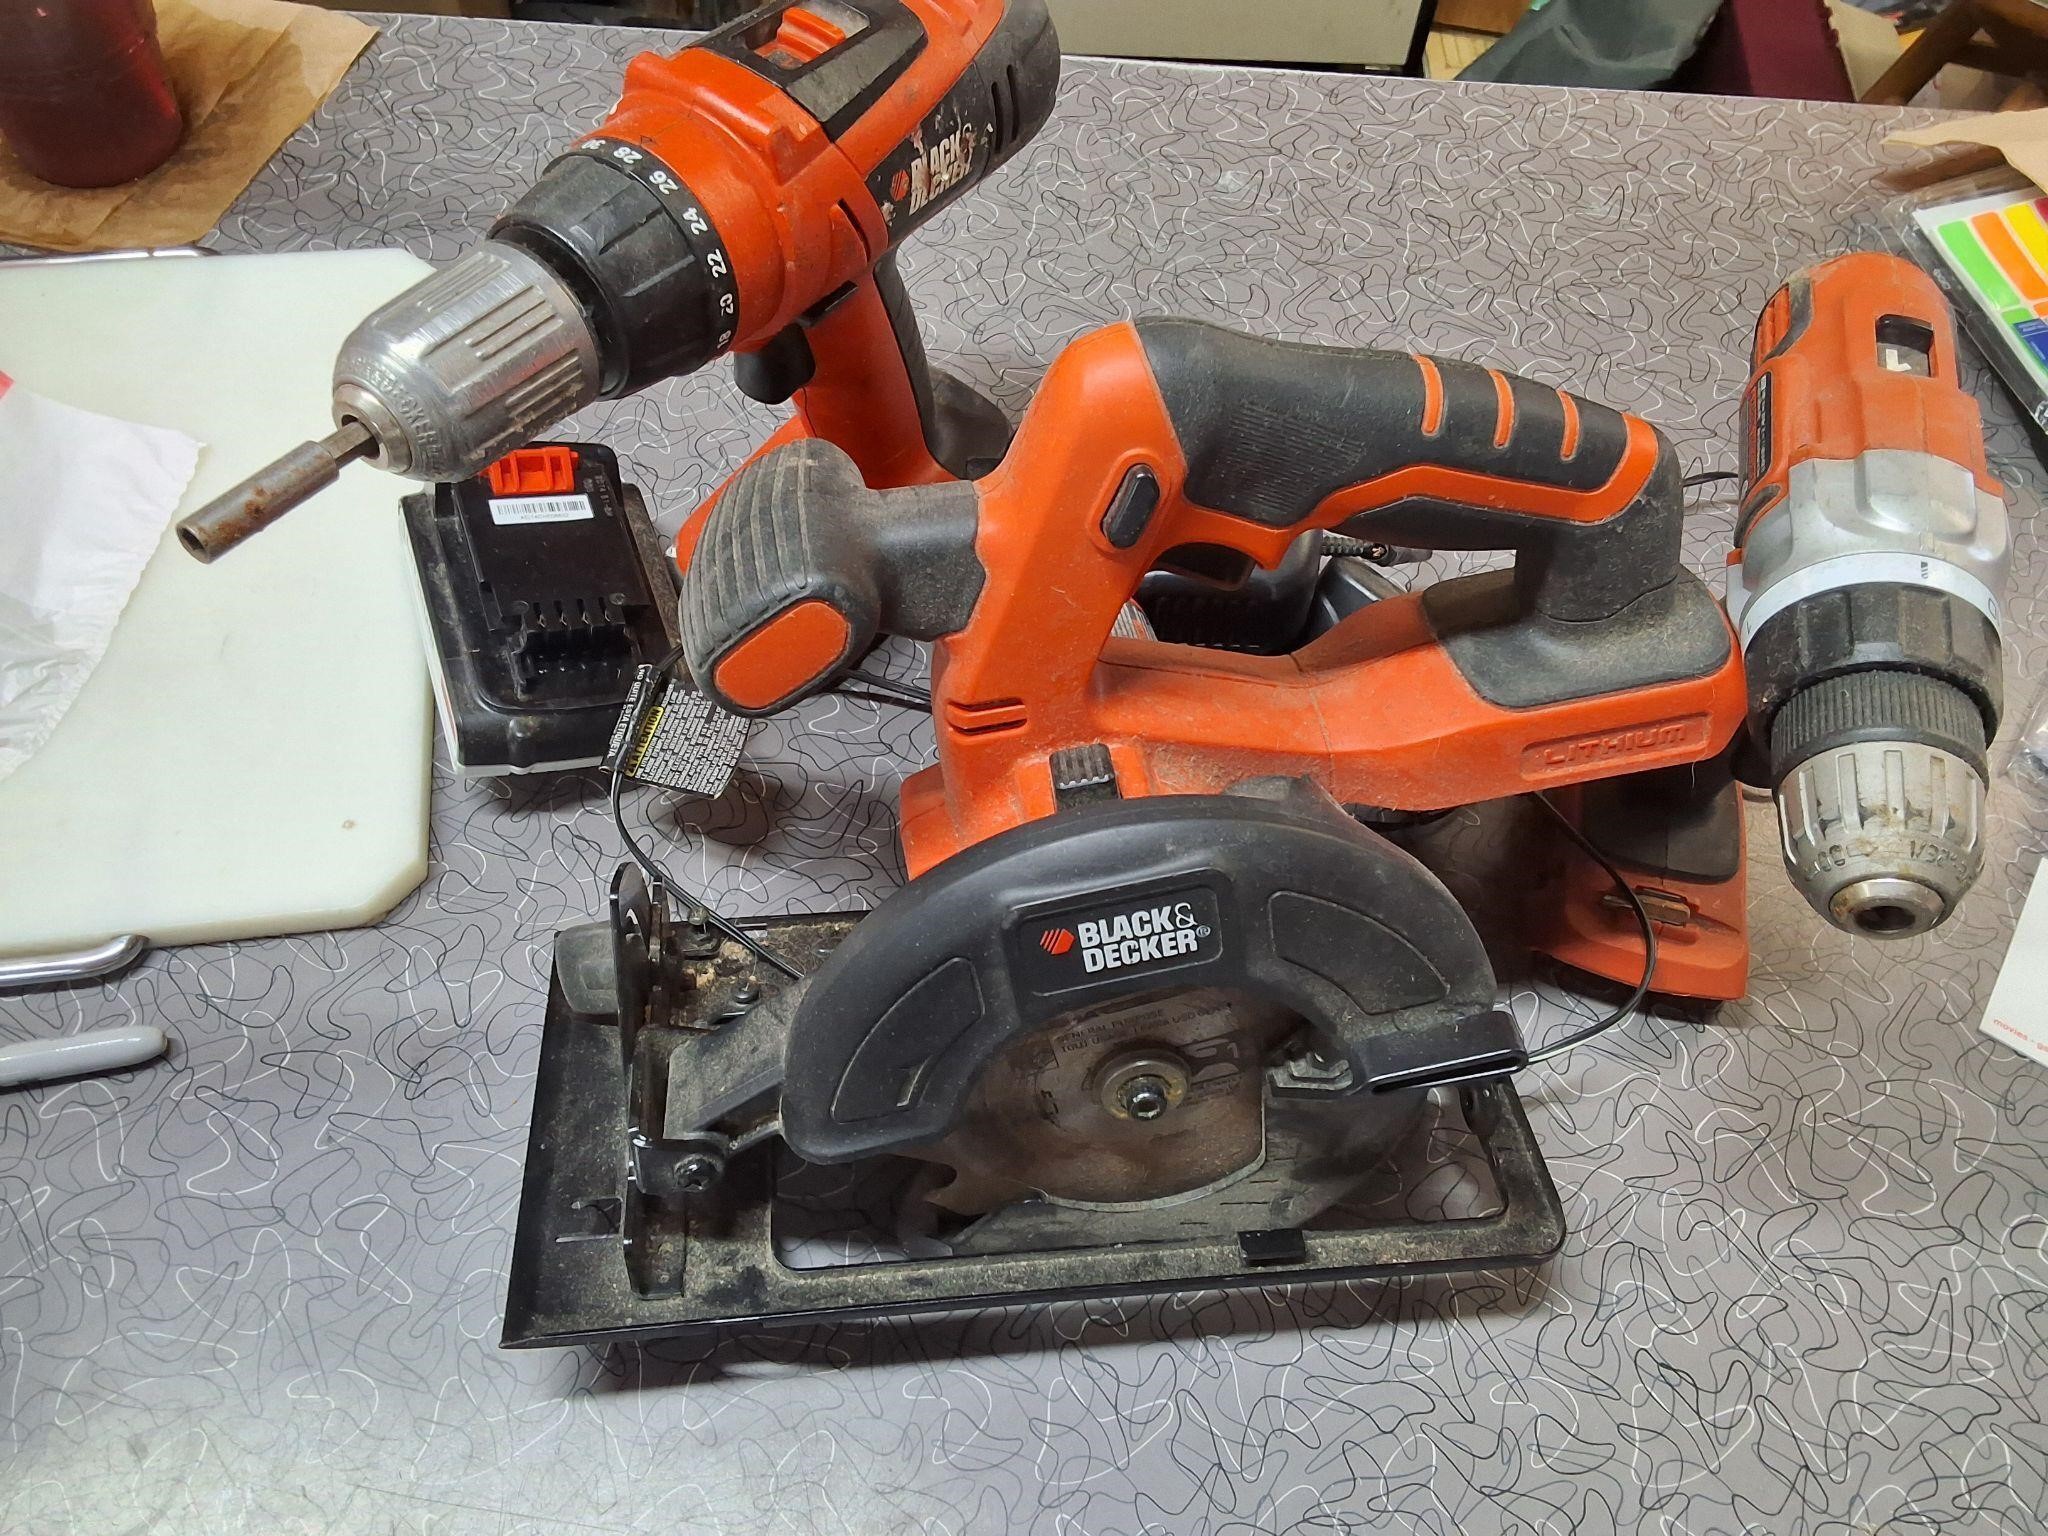 Black and Decker tool lot